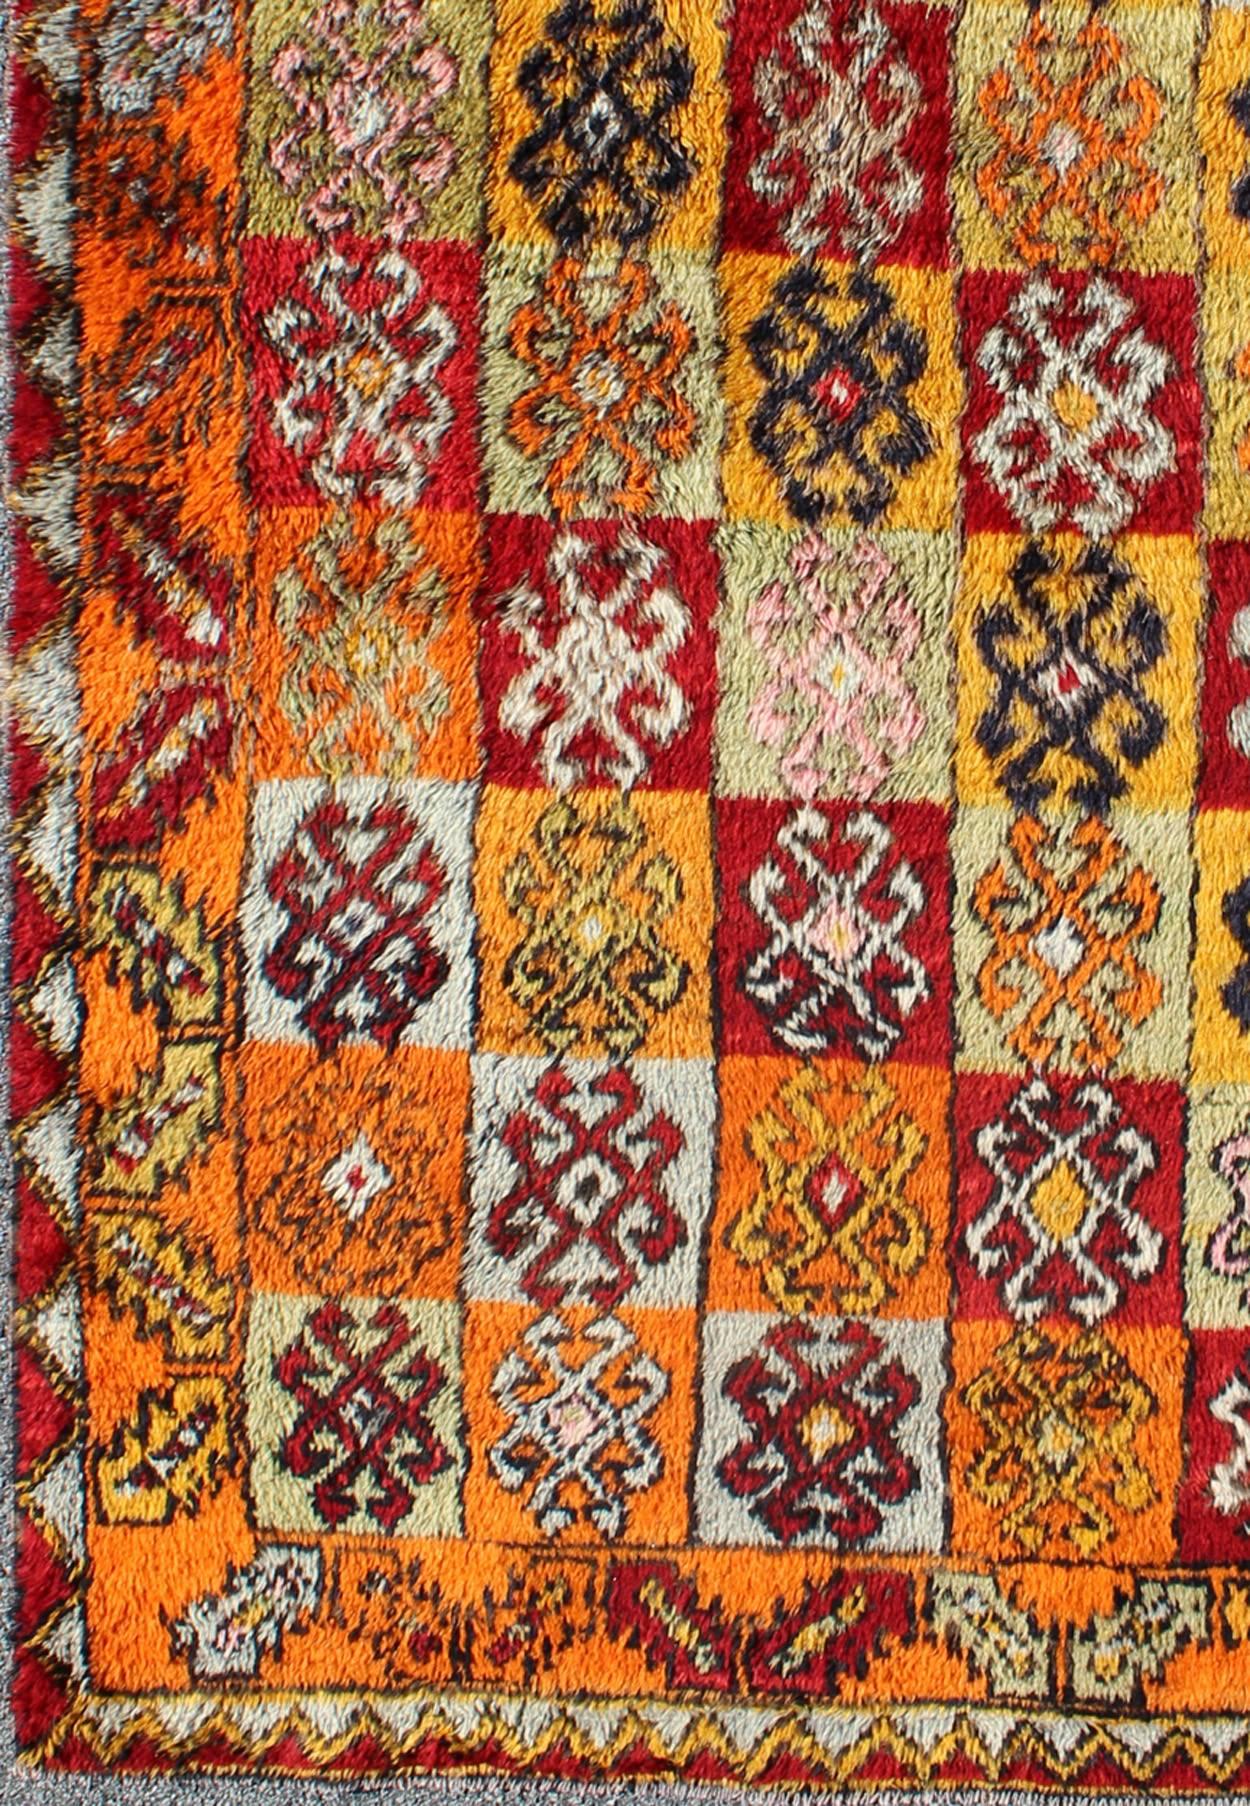 Tribal checkerboard design vintage Turkish Tulu rug with bright multi-colors, rug en-165404, country of origin / type: Turkey / Tulu, circa 1950.

This vintage Turkish Tulu-Oushak rug from the mid-20th century features a checkerboard pattern of